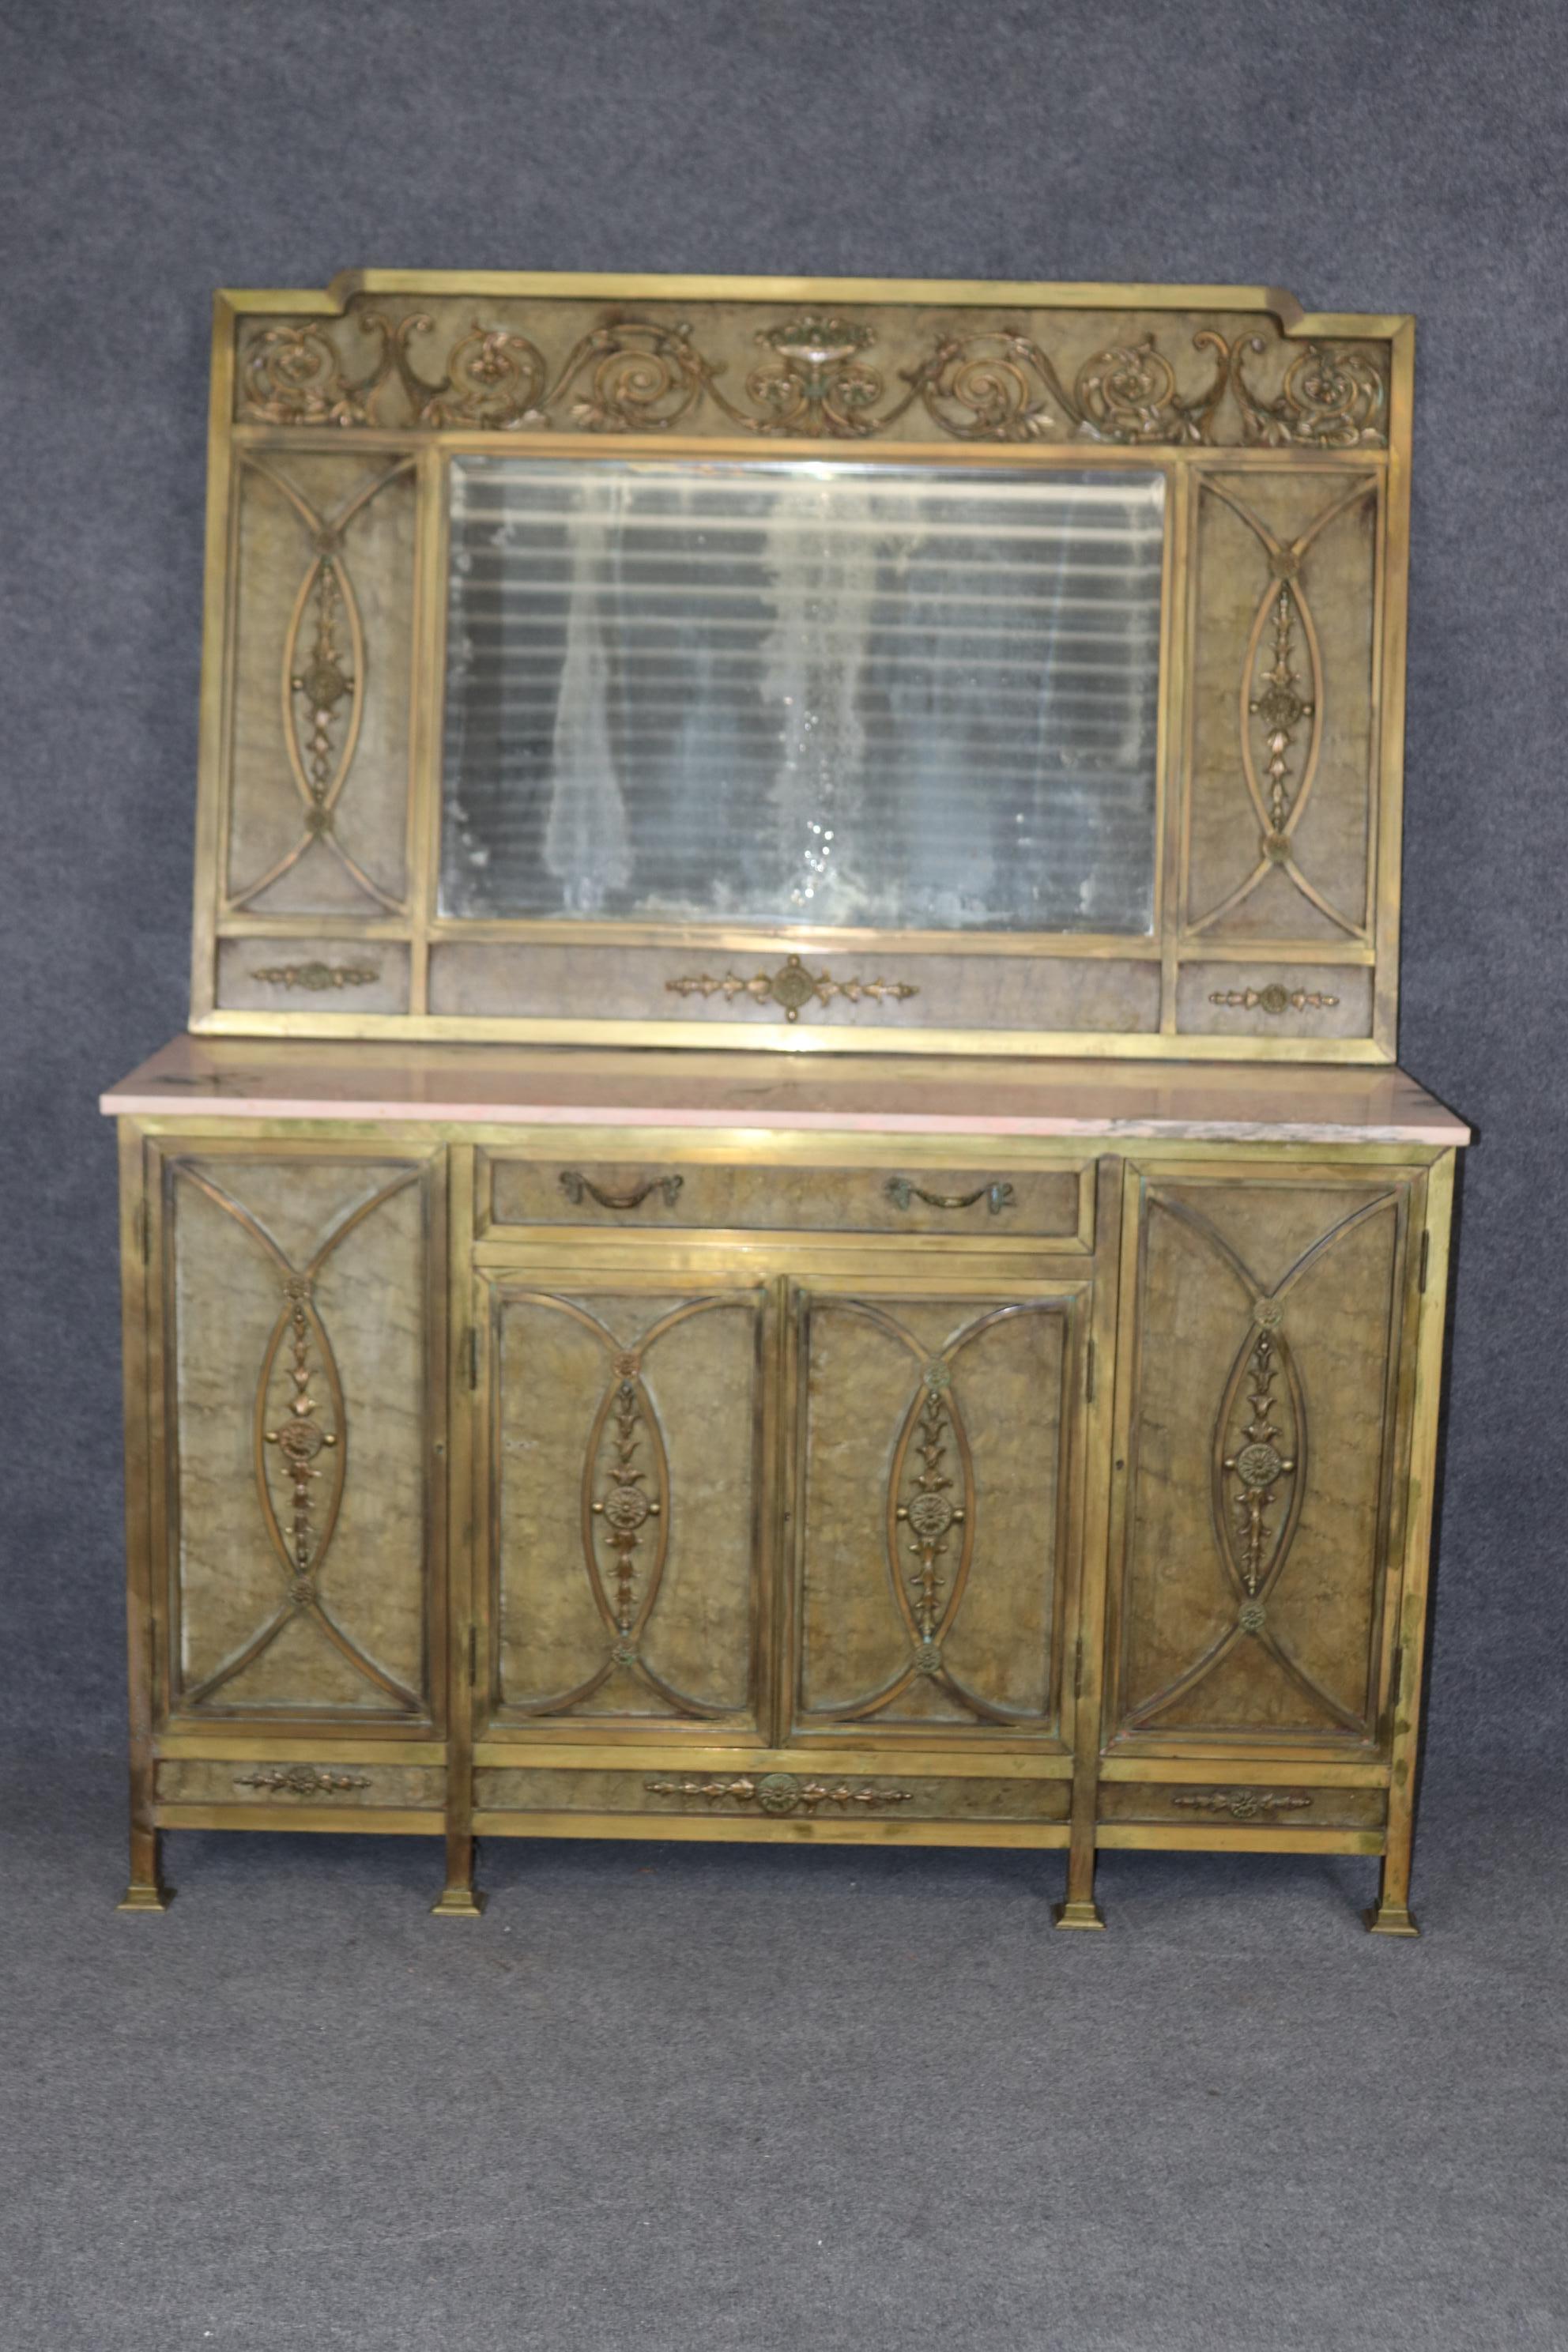 This is a superbly crafted, one-of-a-kind solid bronze mirrored sideboard in teh Directoire style from France. The piece is in very good condition with its original patina and no major issues or any kind of damage to speak of. There is minor wear